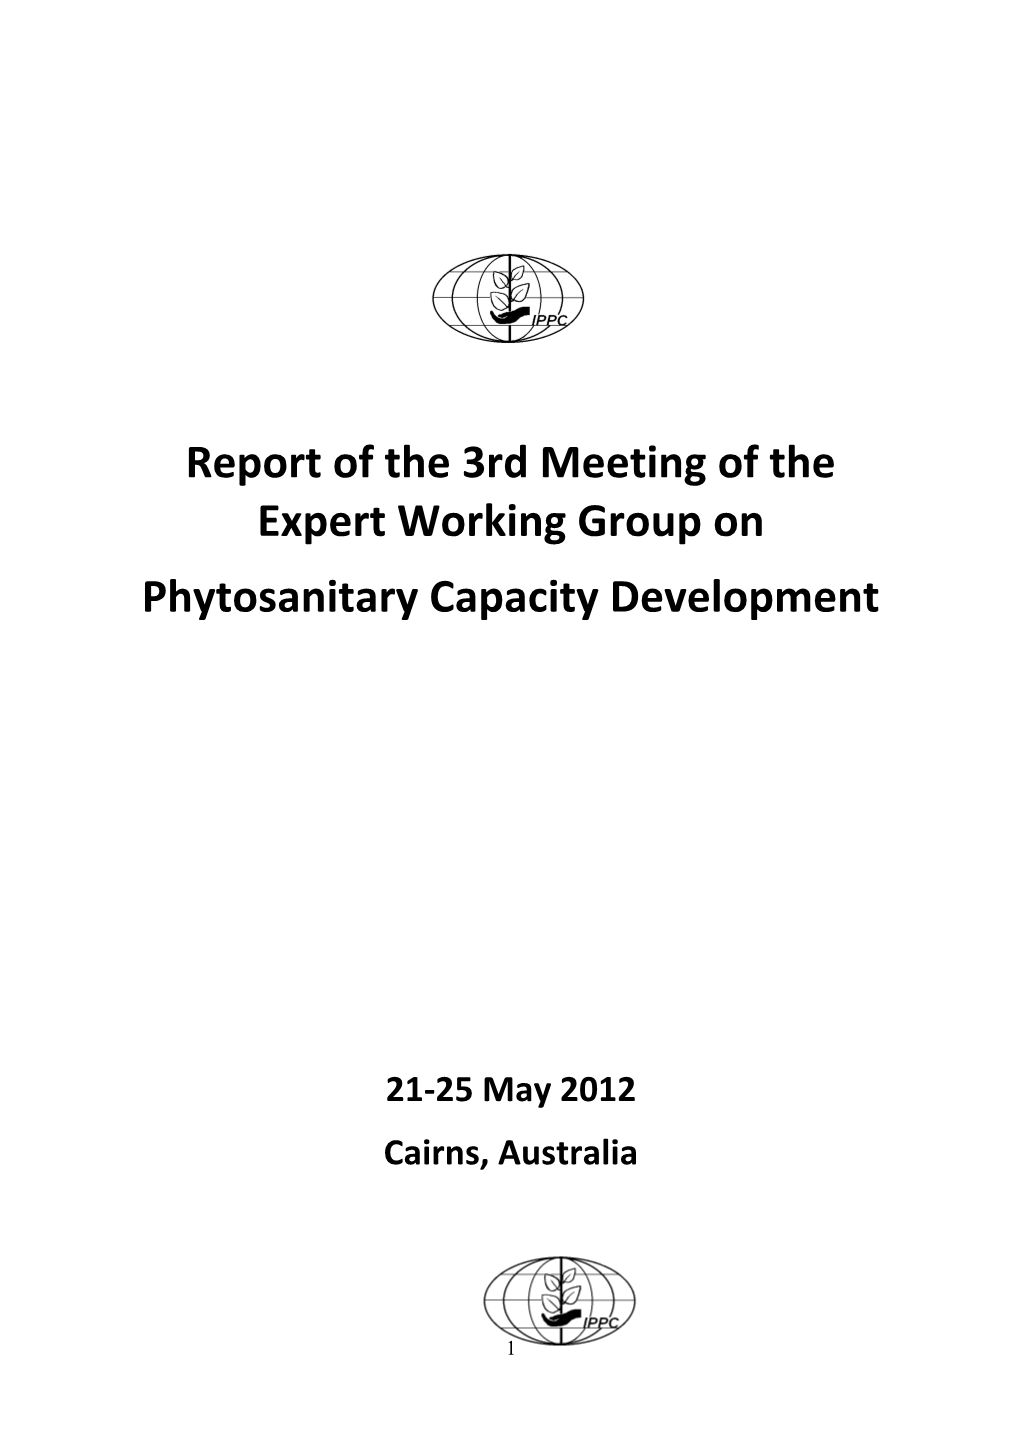 Report of the 3Rd Meeting of the Expert Working Group On